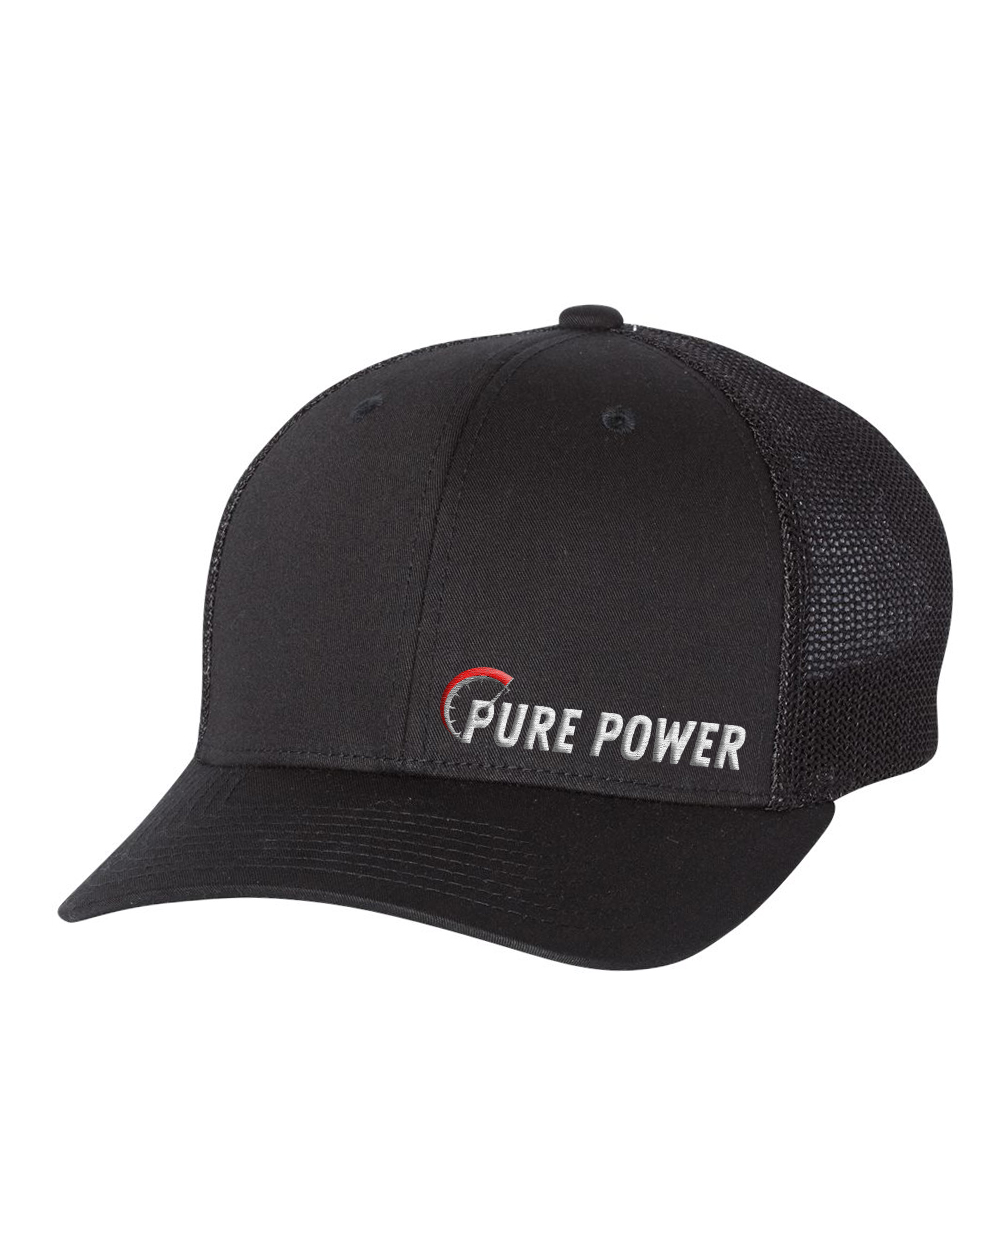 Ride Pure Power Logo Night Out Pro Embroidered Snapback Trucker Hat Black/Black